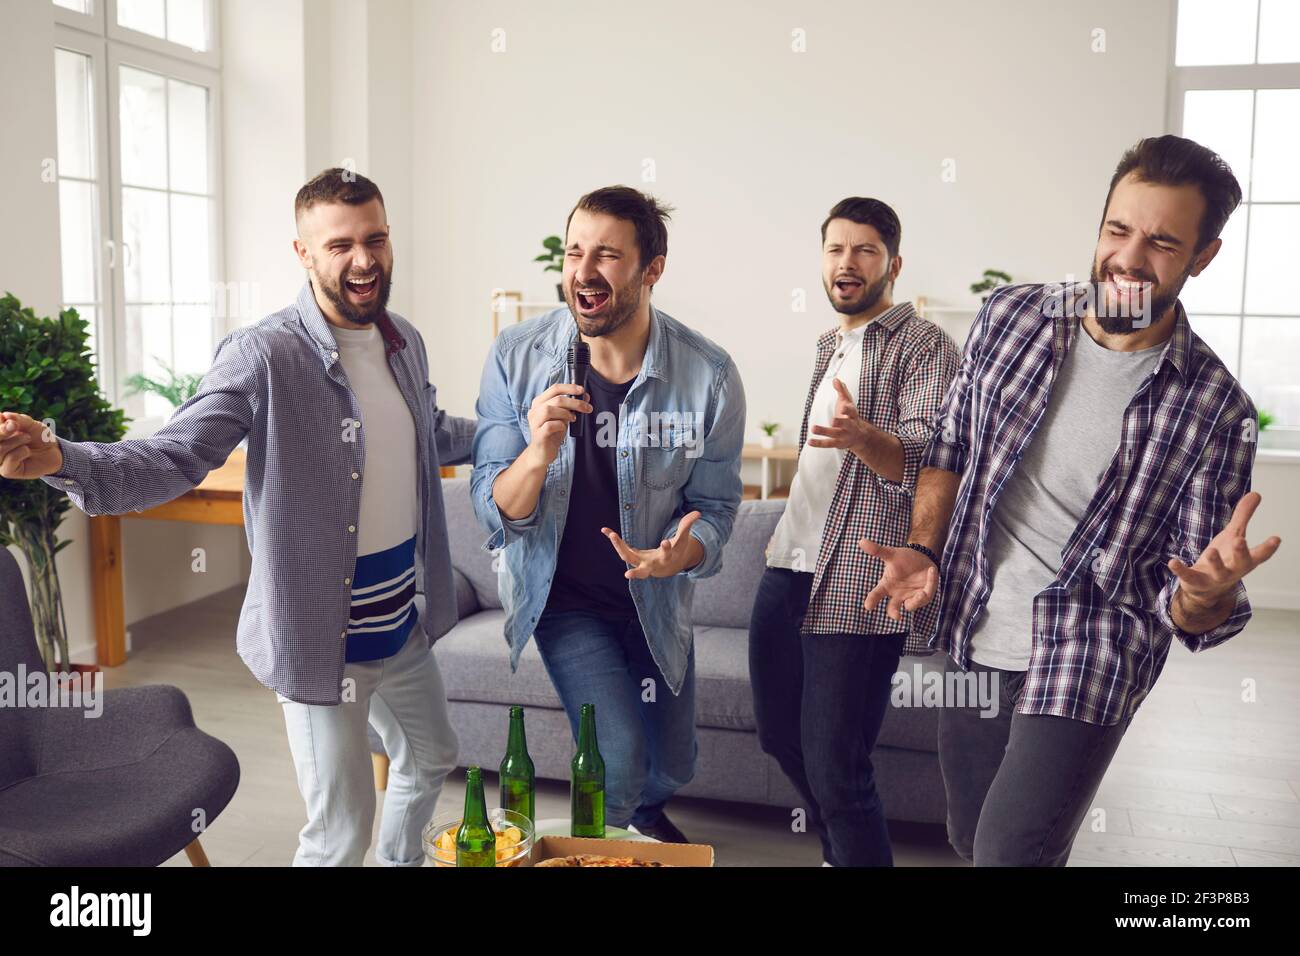 Karaoke home party and having fun for male company concept Stock Photo